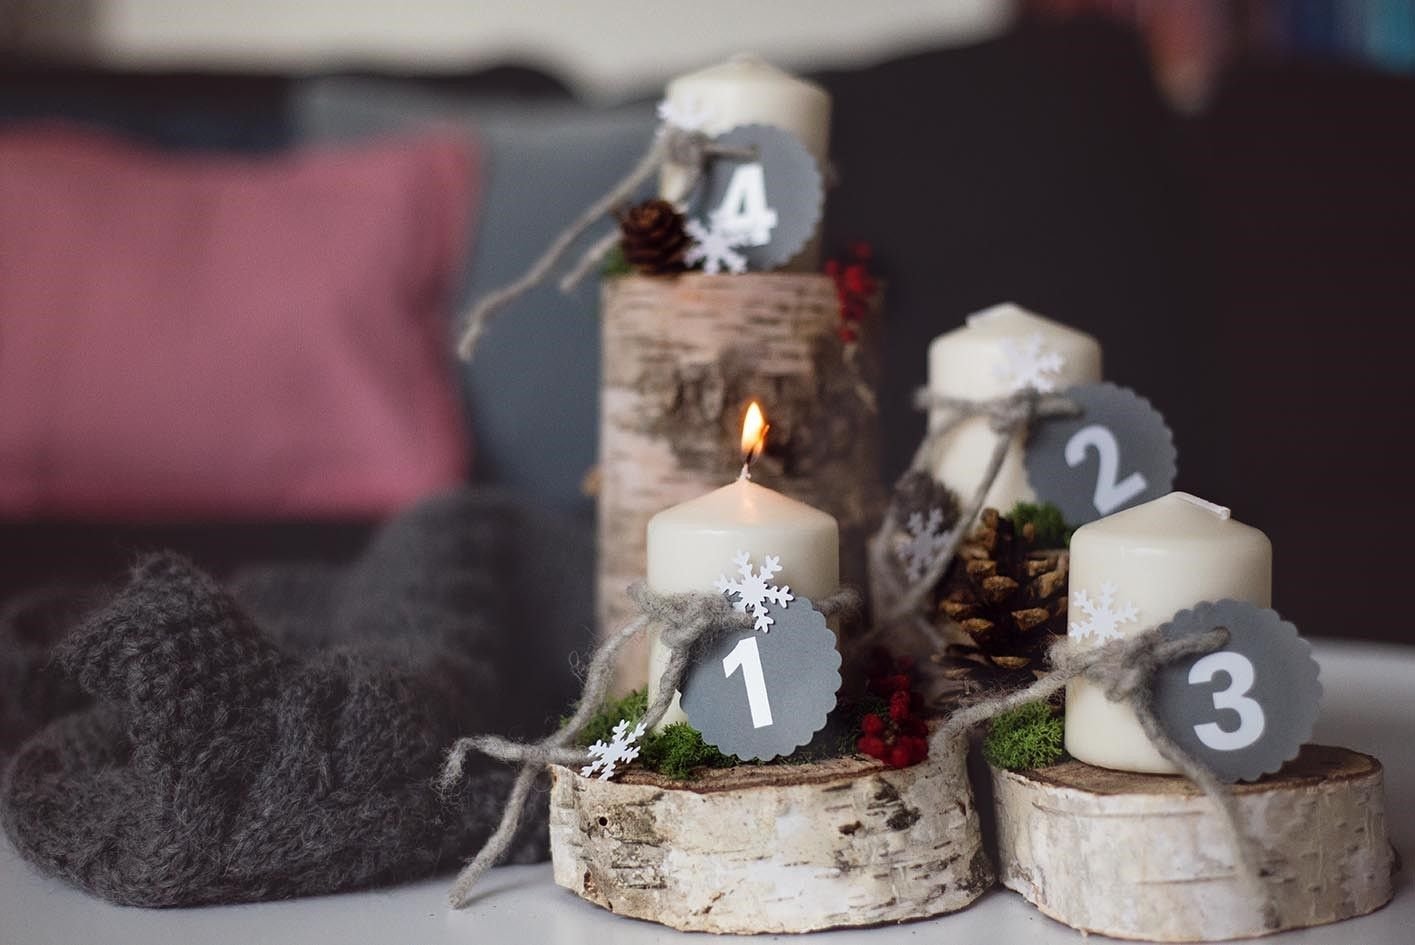 Christmas ideas ideas that will make your home smell